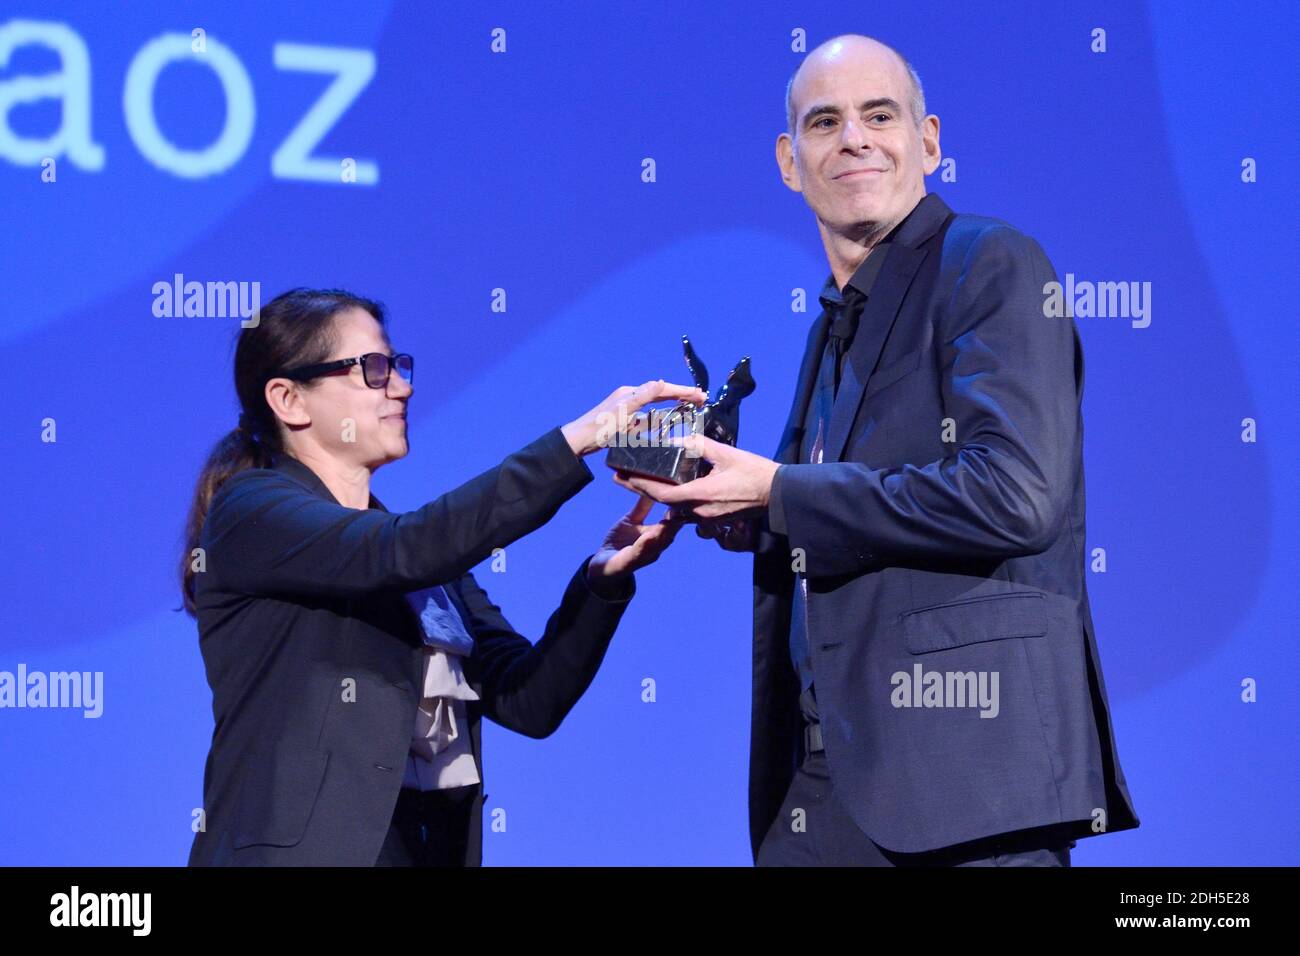 Samuel Maoz receives the Silver Lion - Grand Jury Prize Award for 'Foxtrot' from 'Venezia 74' jury member Ildiko Enyedi during the Closing Ceremony of the 74th Venice International Film Festival (Mostra di Venezia) at the Lido, Venice, Italy on September 09, 2017. Photo by Aurore Marechal/ABACAPRESS.COM Stock Photo